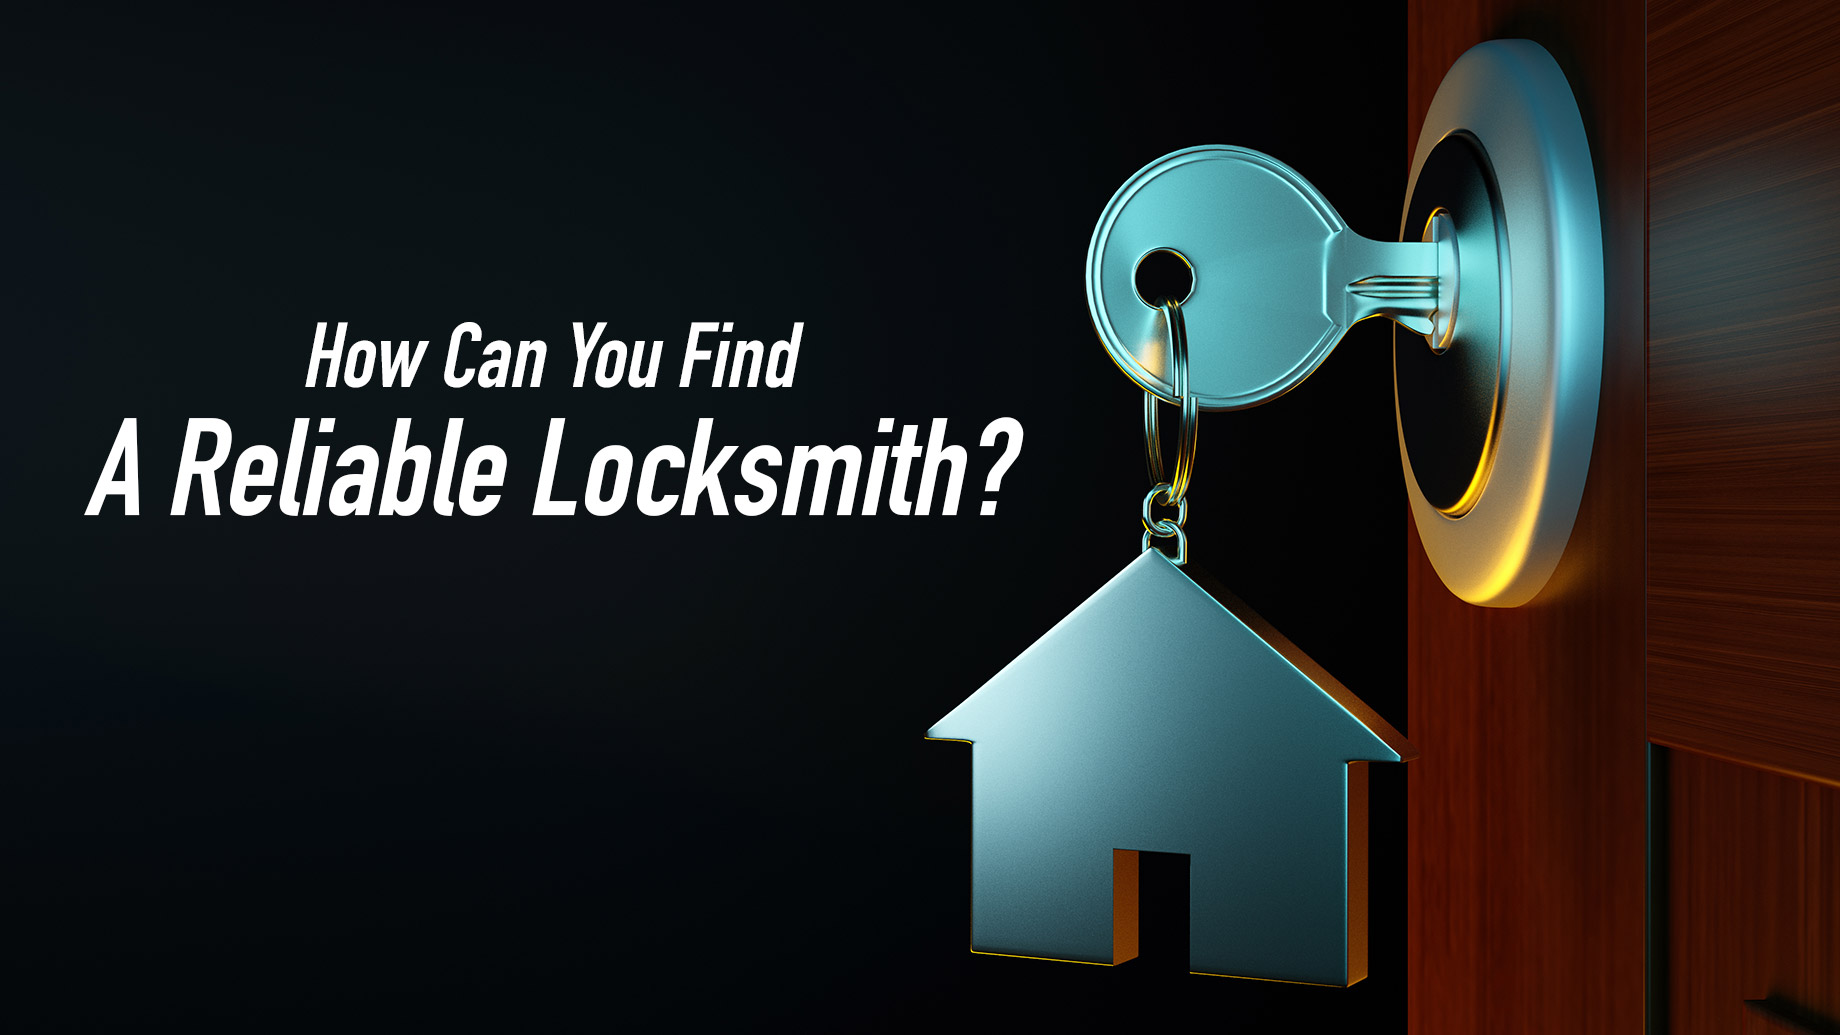 How Can You Find A Reliable Locksmith?